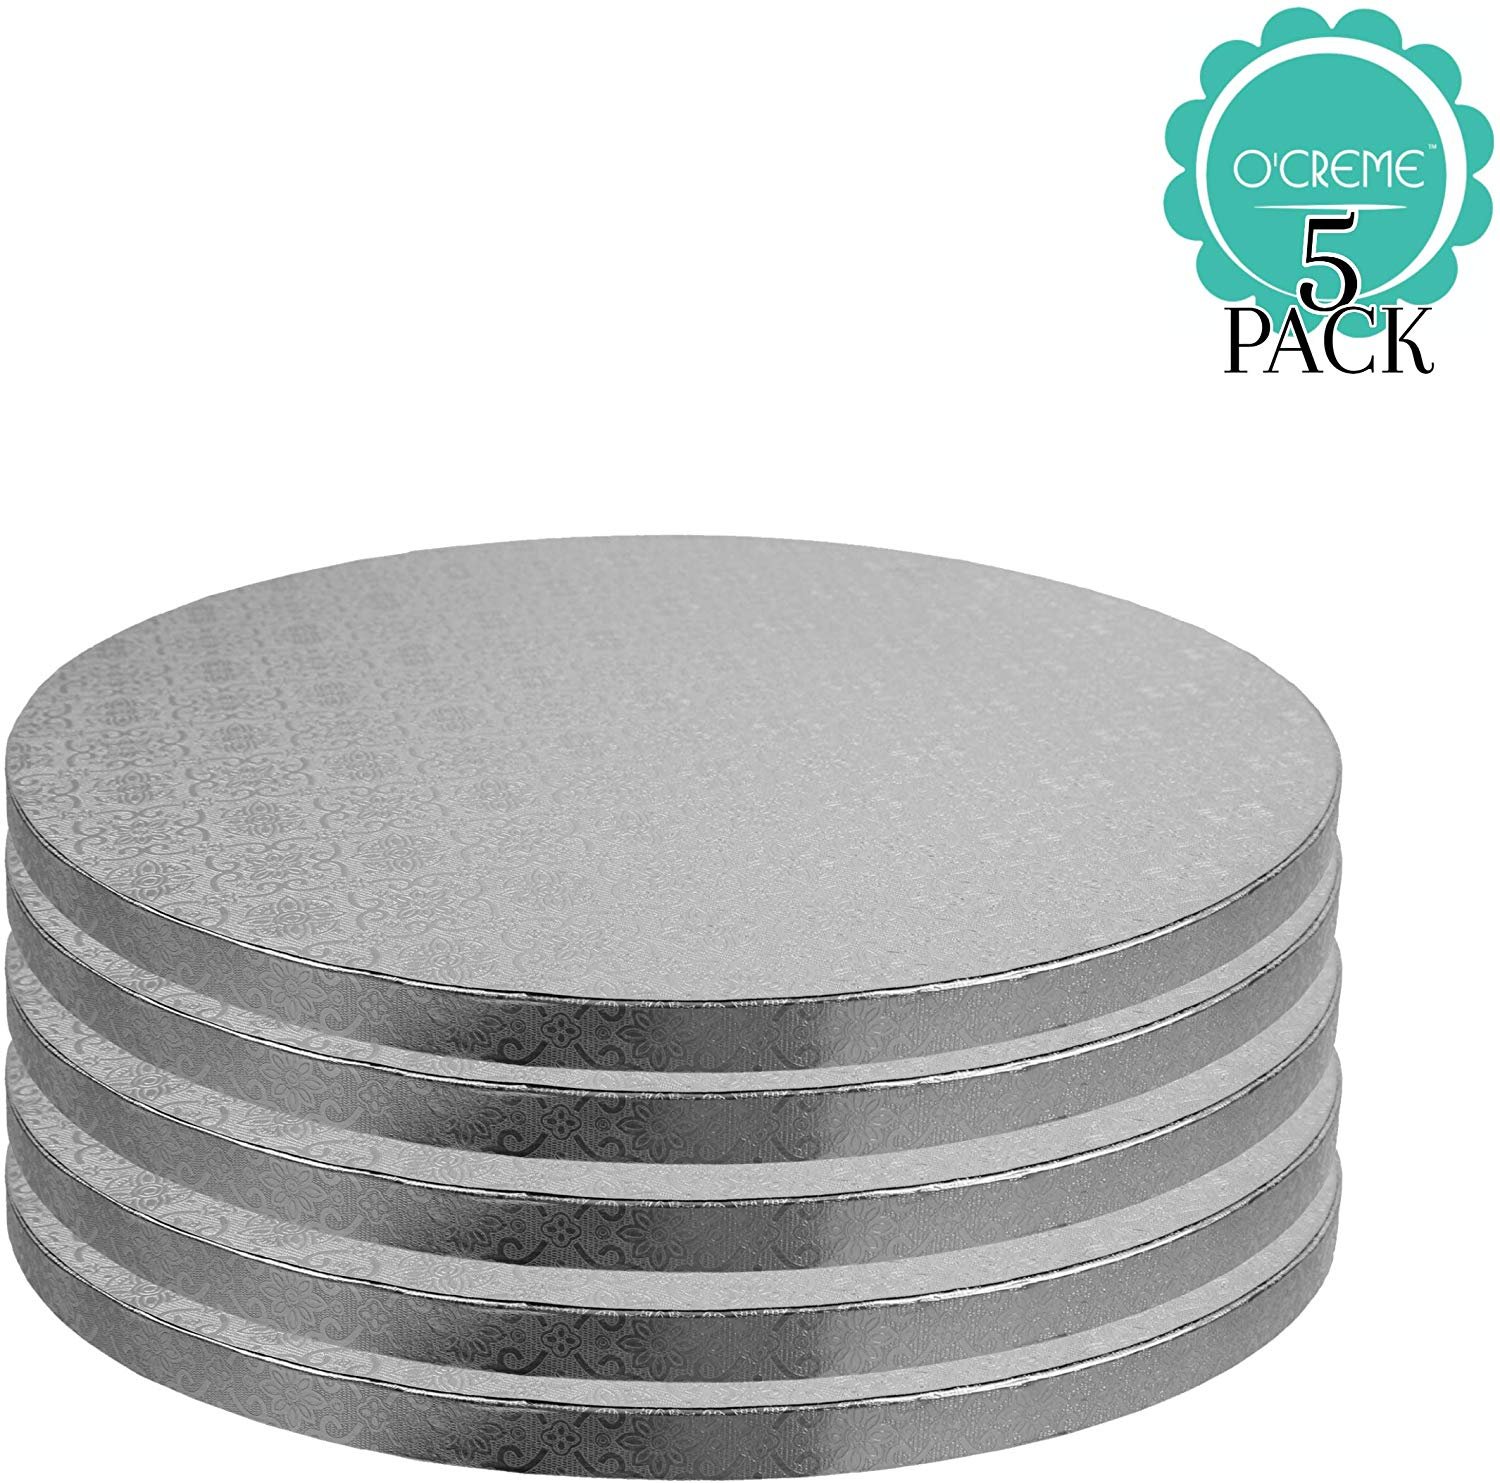 OCreme Cake Board, Silver Foil Round Cake Circles with Gorgeous Design, Sturdy & Durable 1/2 Thick Cake Drums, Round Cake Boards with 12 Diameter, Pack of 5 Disposable Cake Drums - image 1 of 6